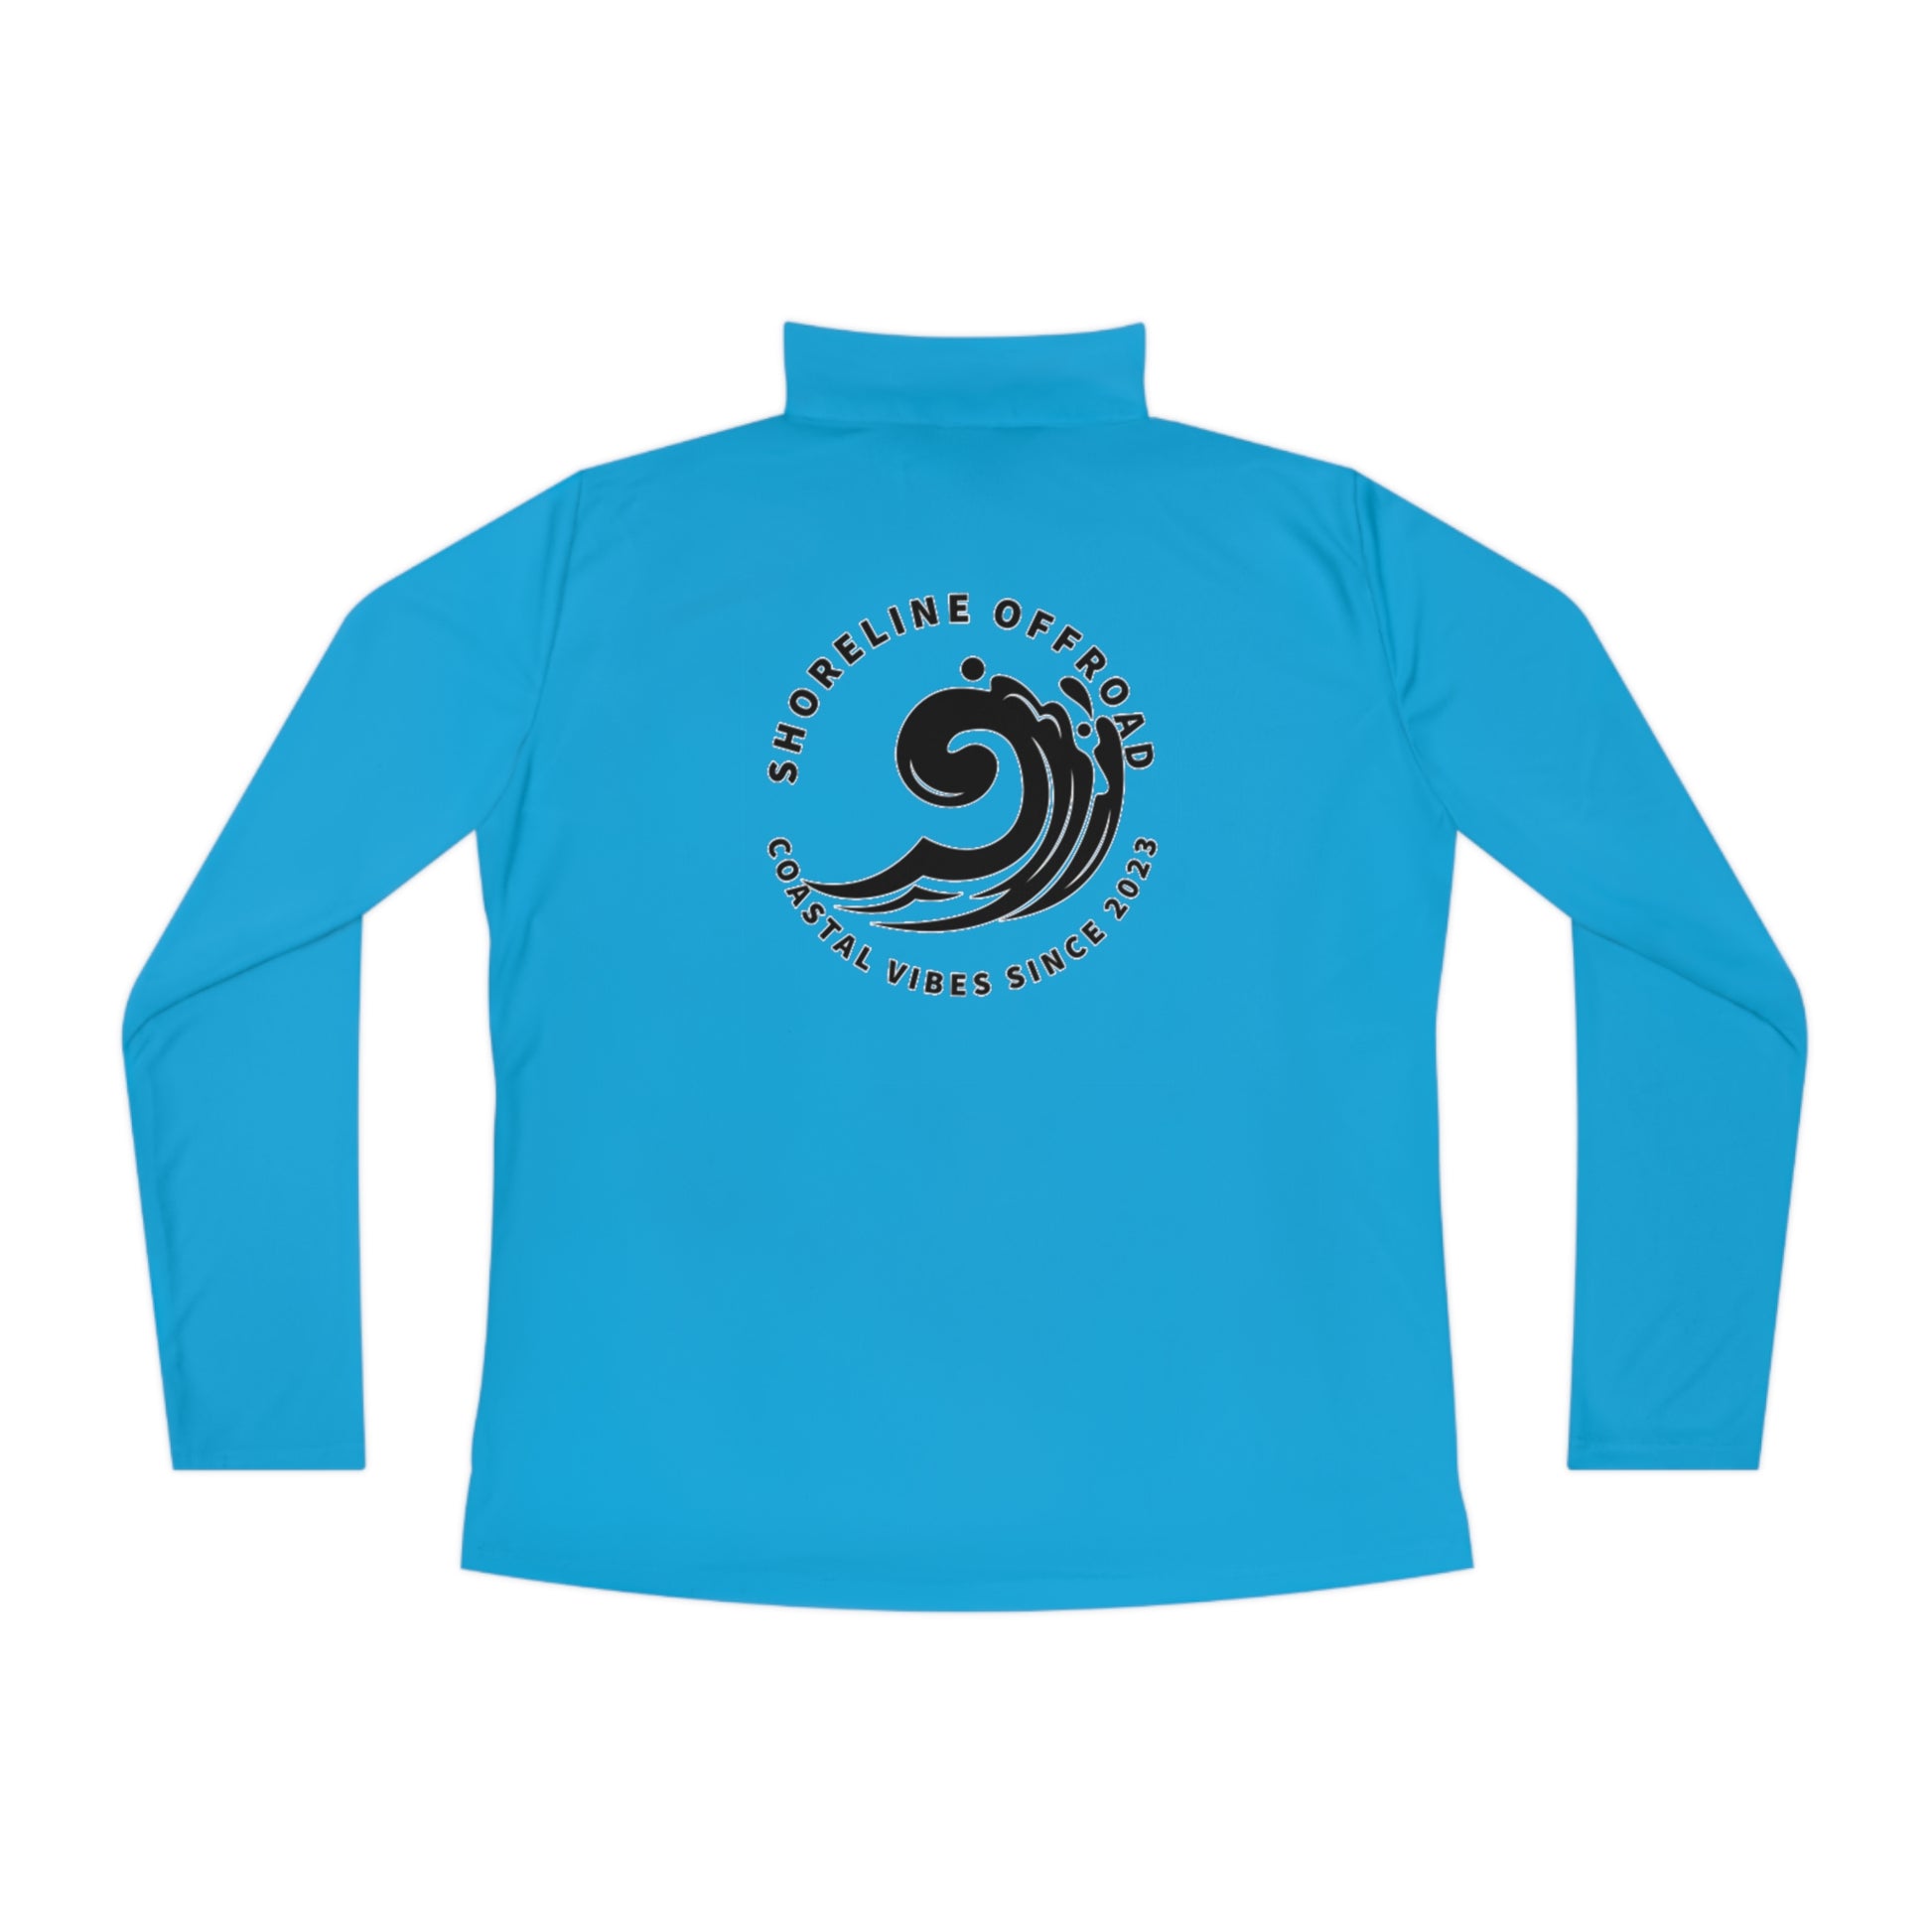 a women's blue long sleeve shirt with an image of a wave on it